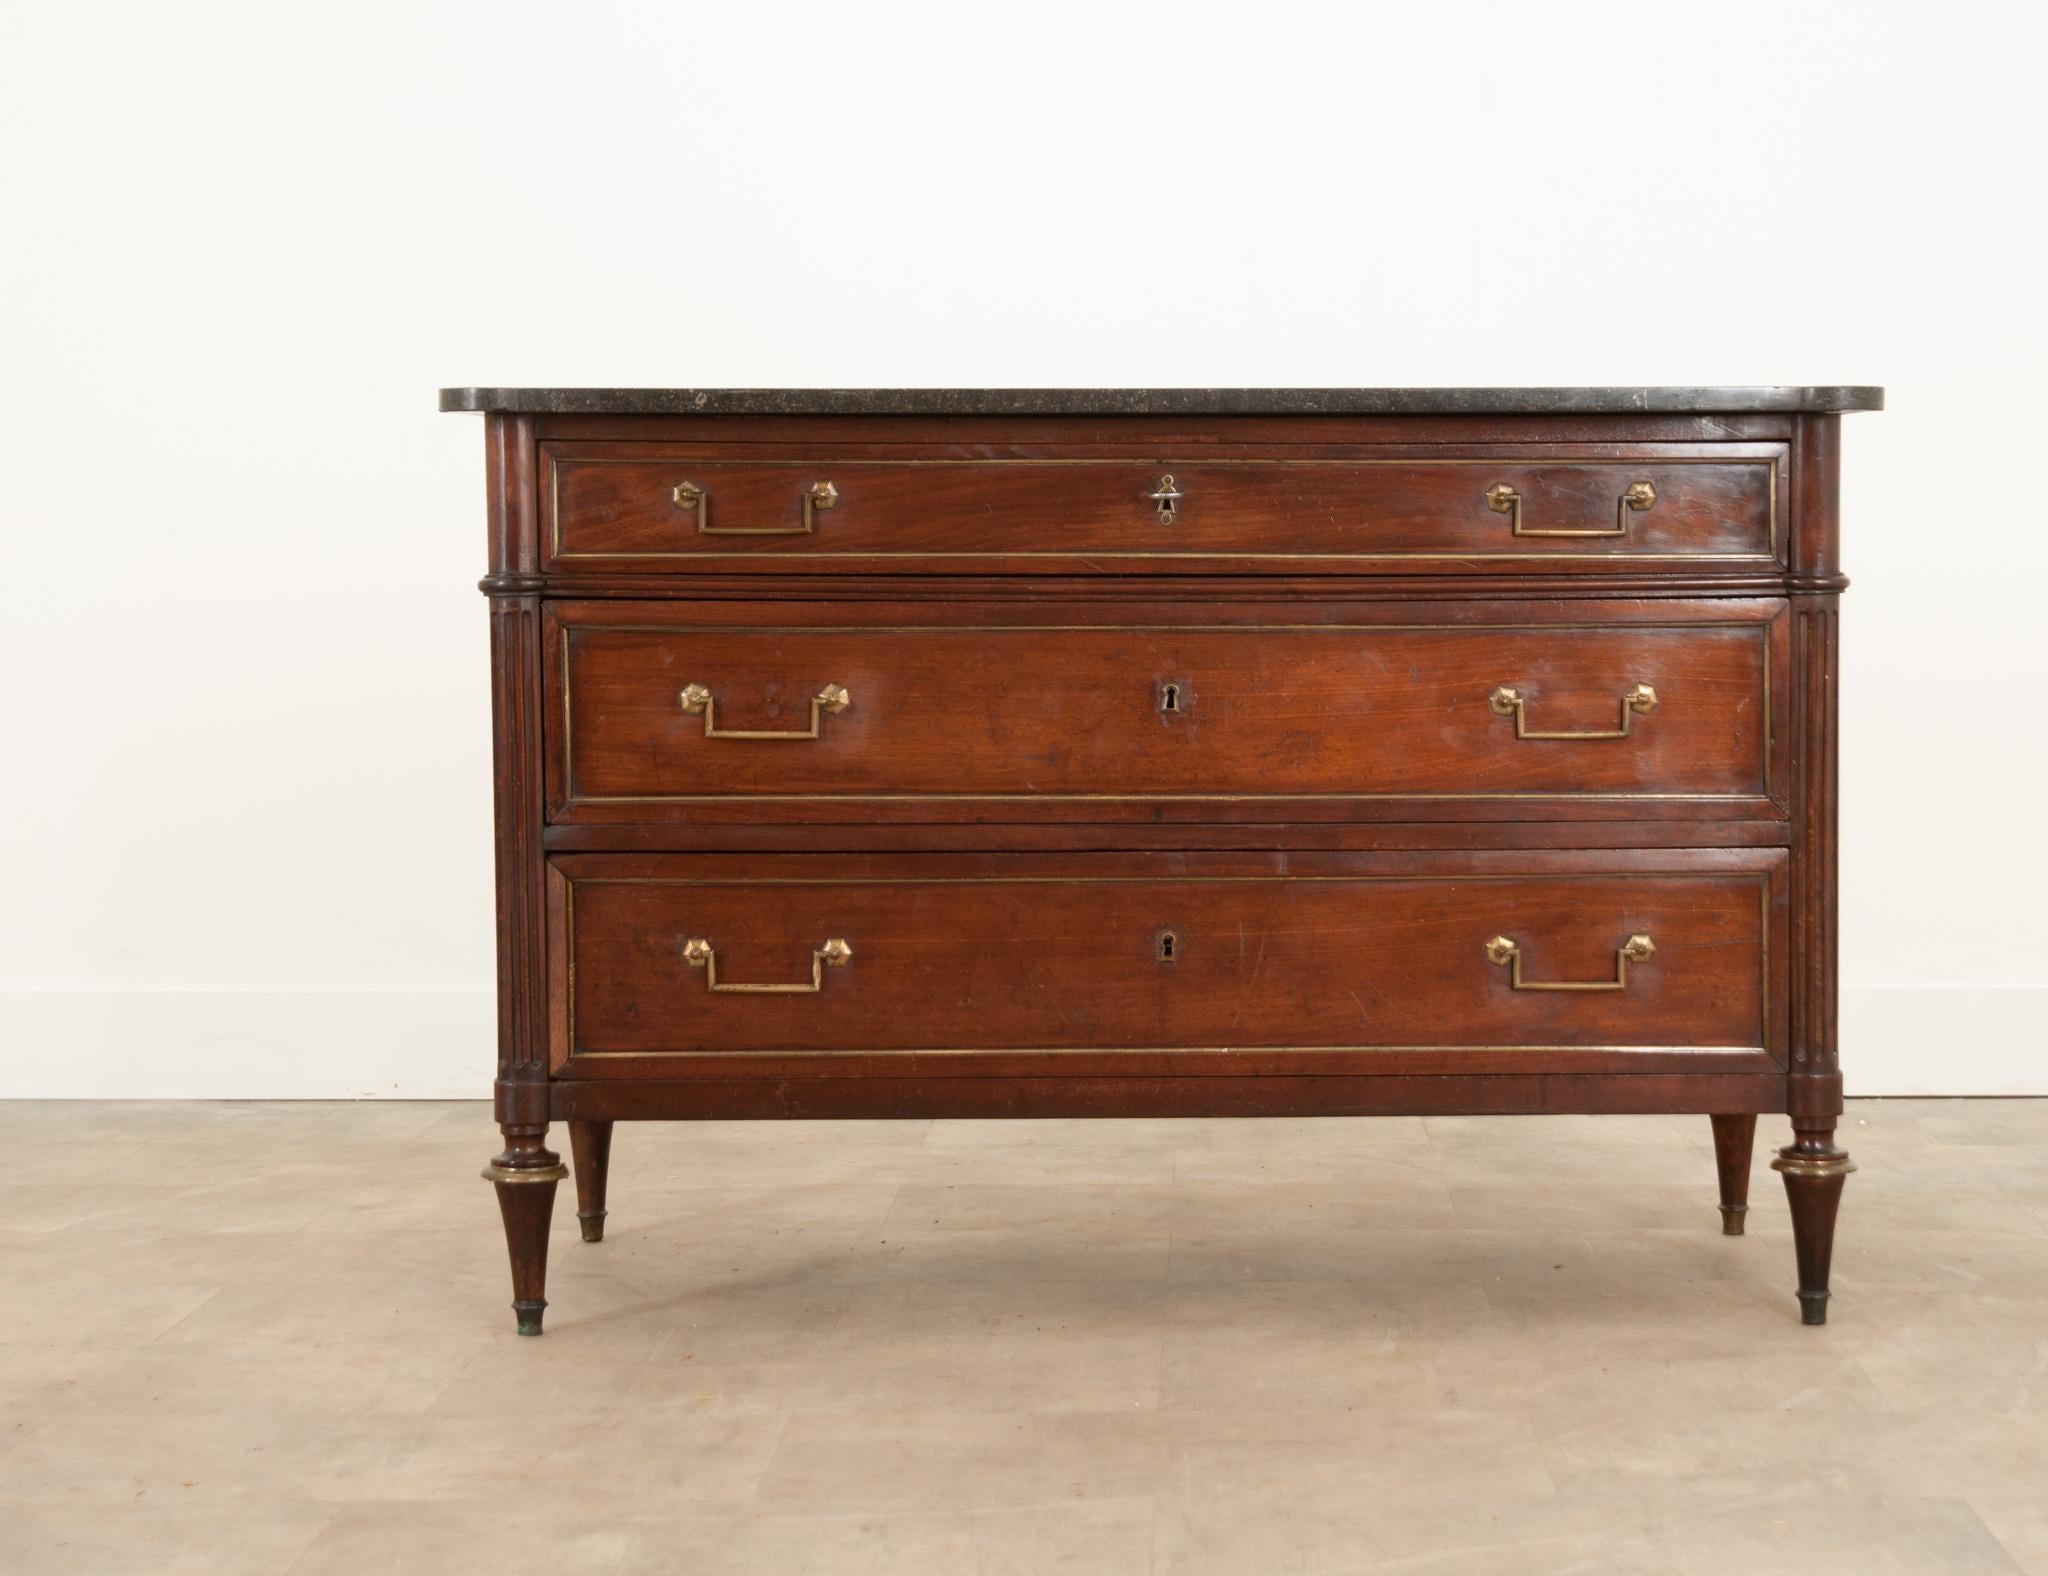 This Louis XVI style commode is made of mahogany, circa 1800, and topped with a shaped piece of Belgian Blue stone. A bank of three drawers with inset brass paneling are all fit with easy to use brass hardware. Each drawer features a functioning